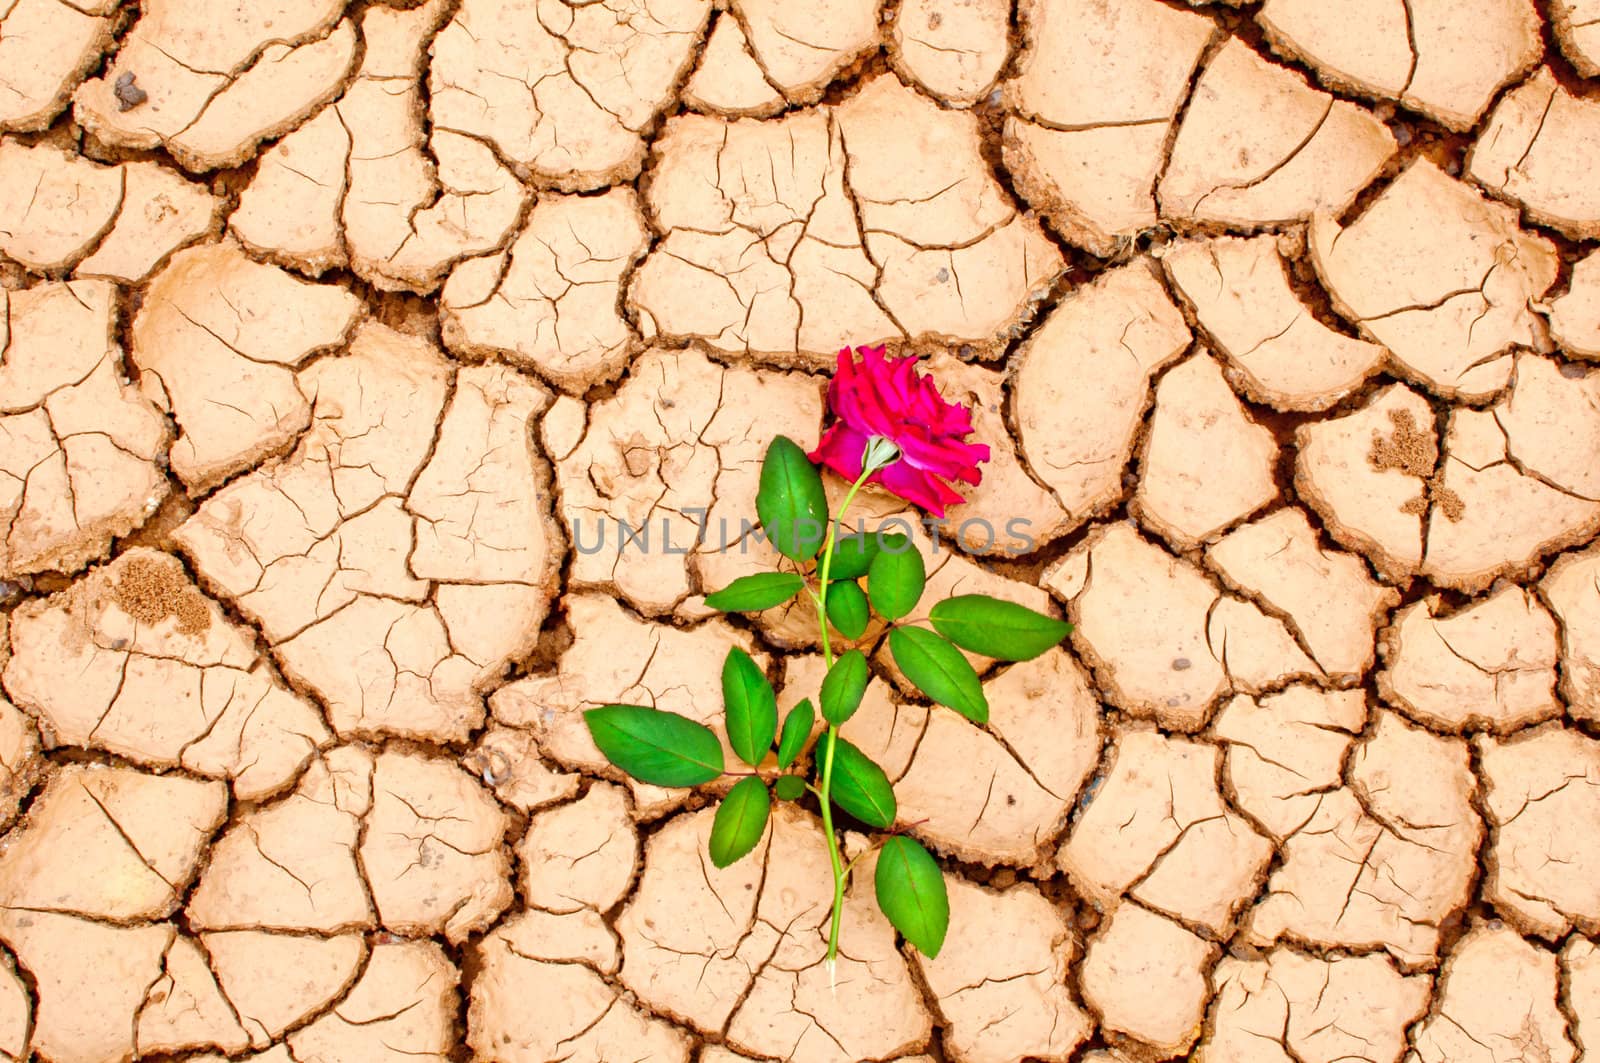 Red rose on cracked ground